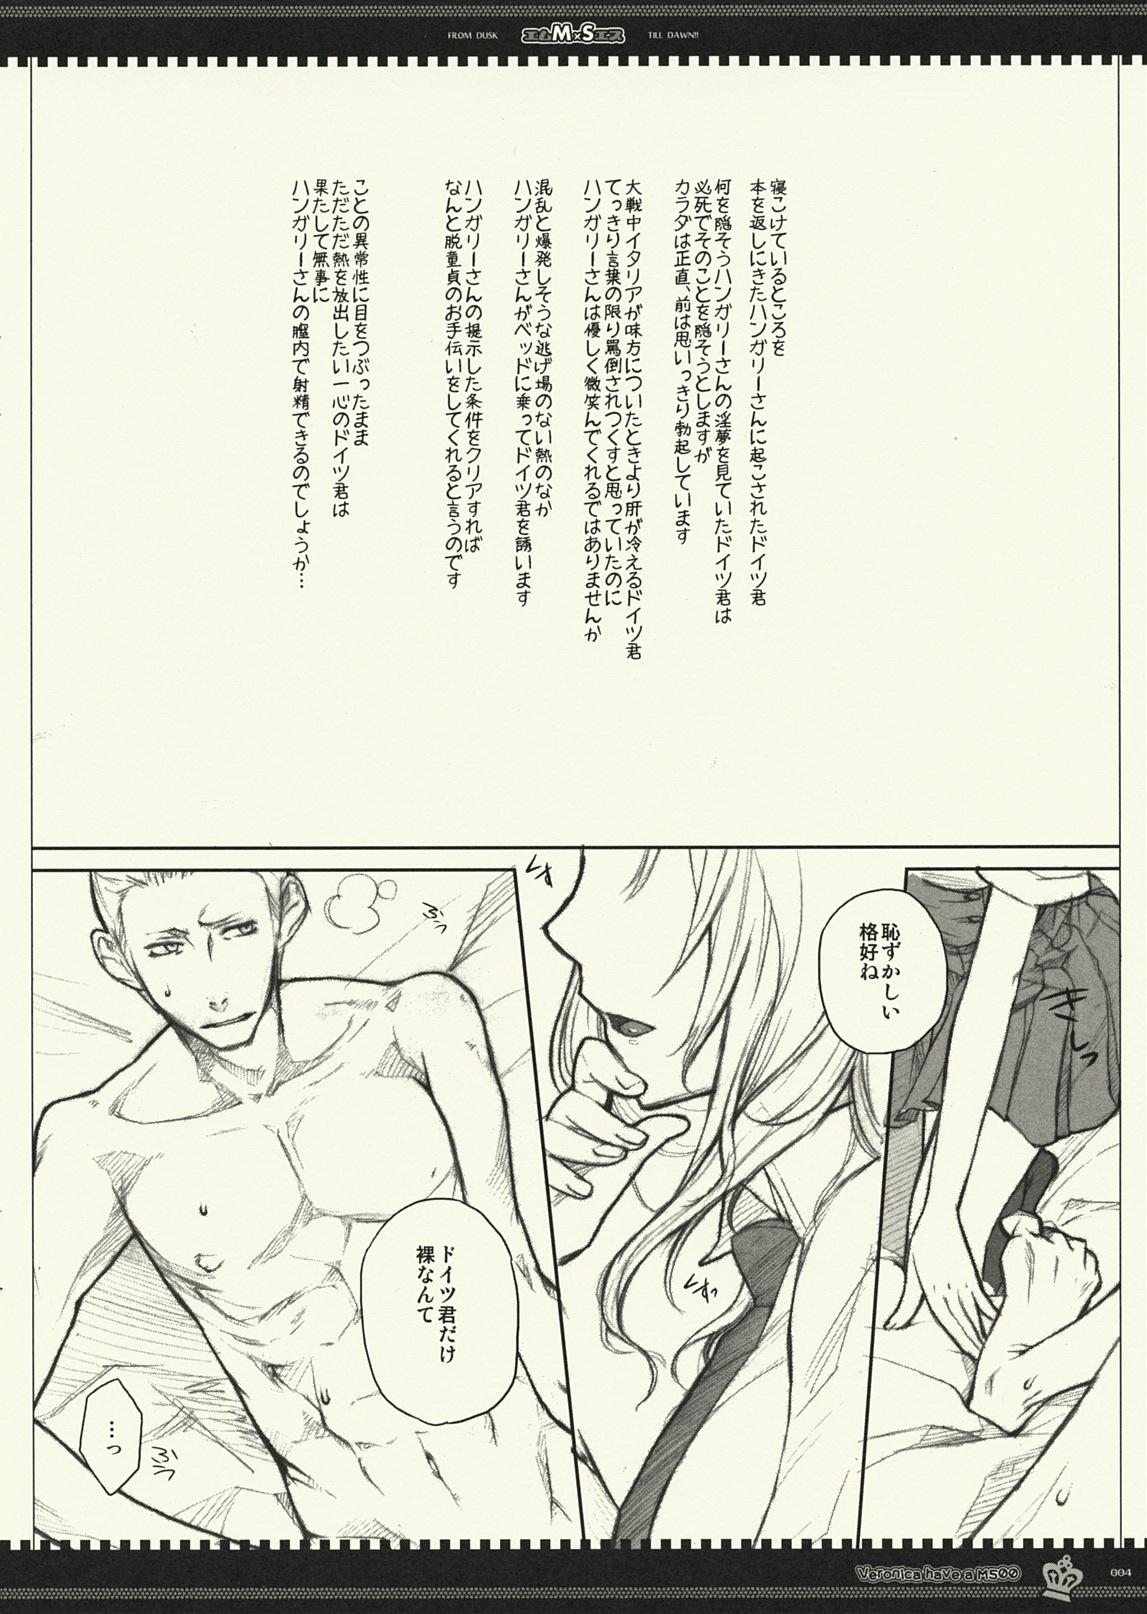 Stepfamily MS - Axis powers hetalia Stretching - Page 3